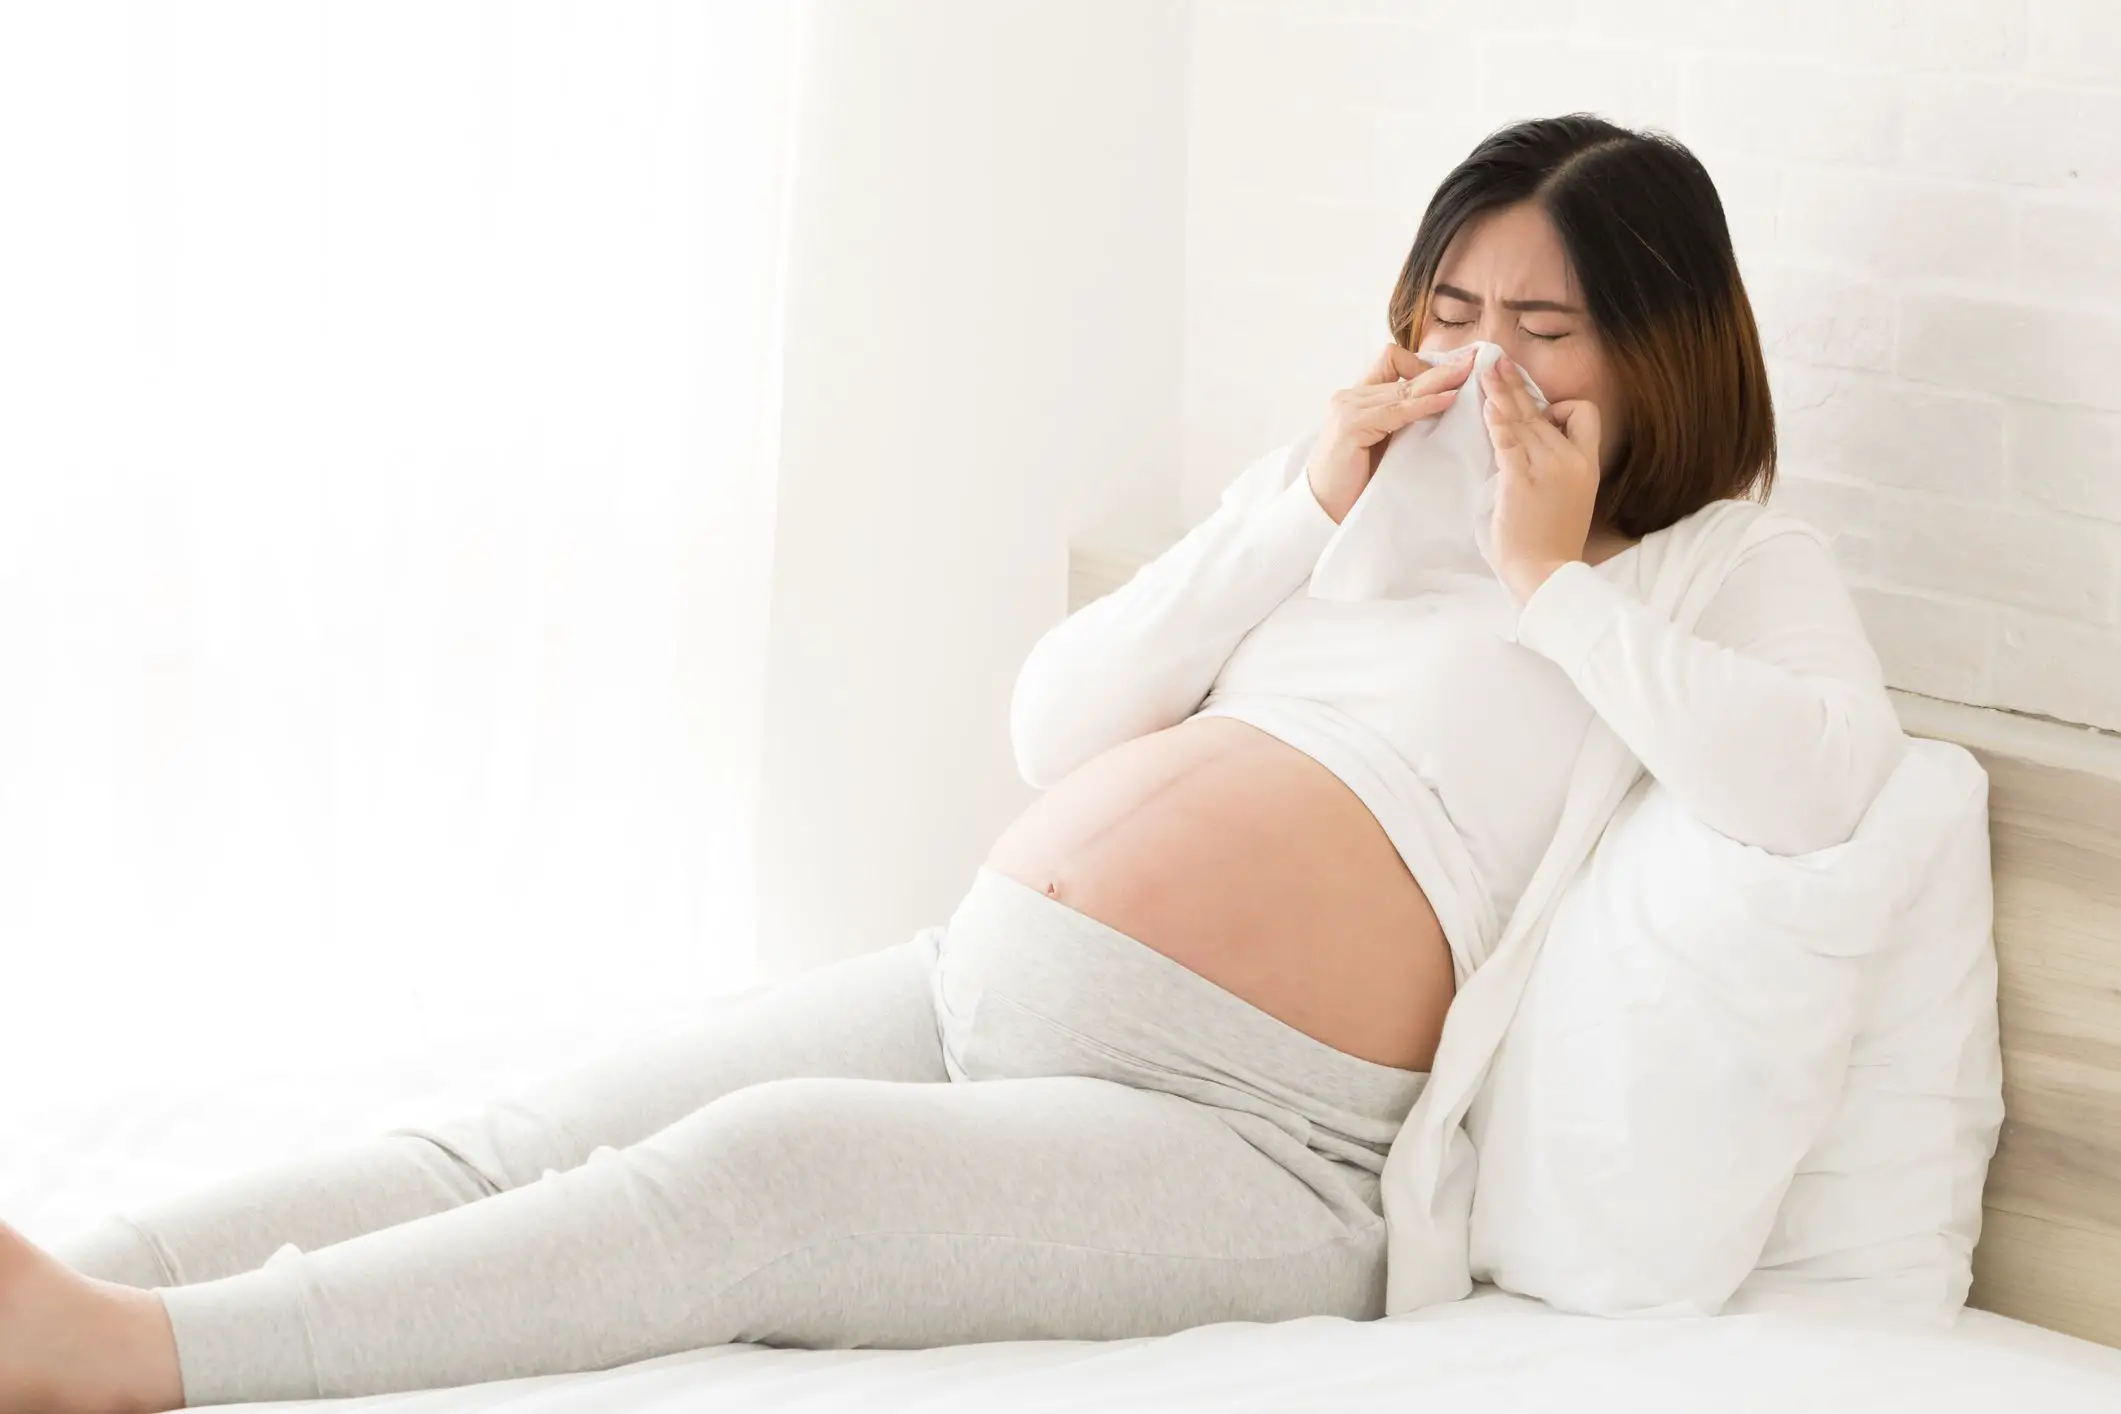 Single Working Mom: What Can I Take For Allergies While Pregnant